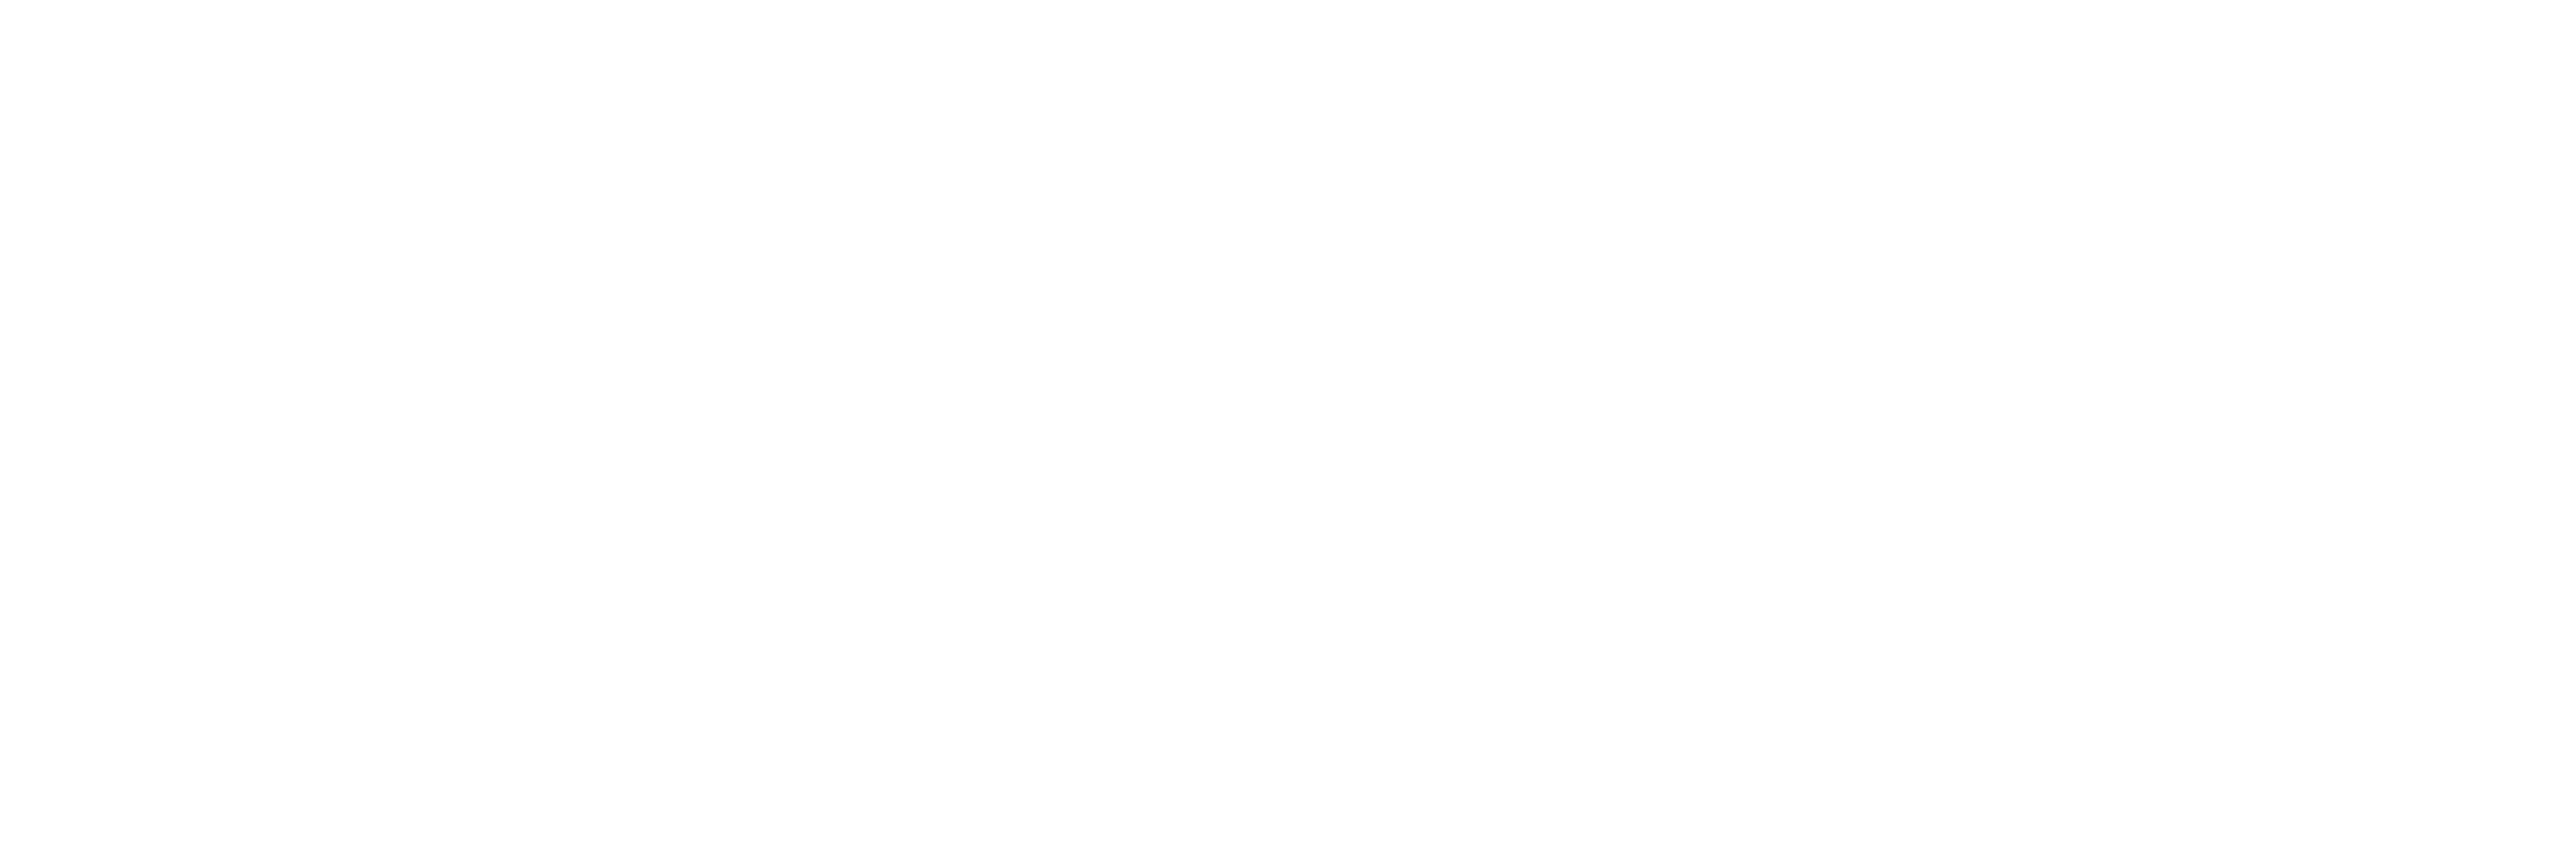 Drug delivery systems